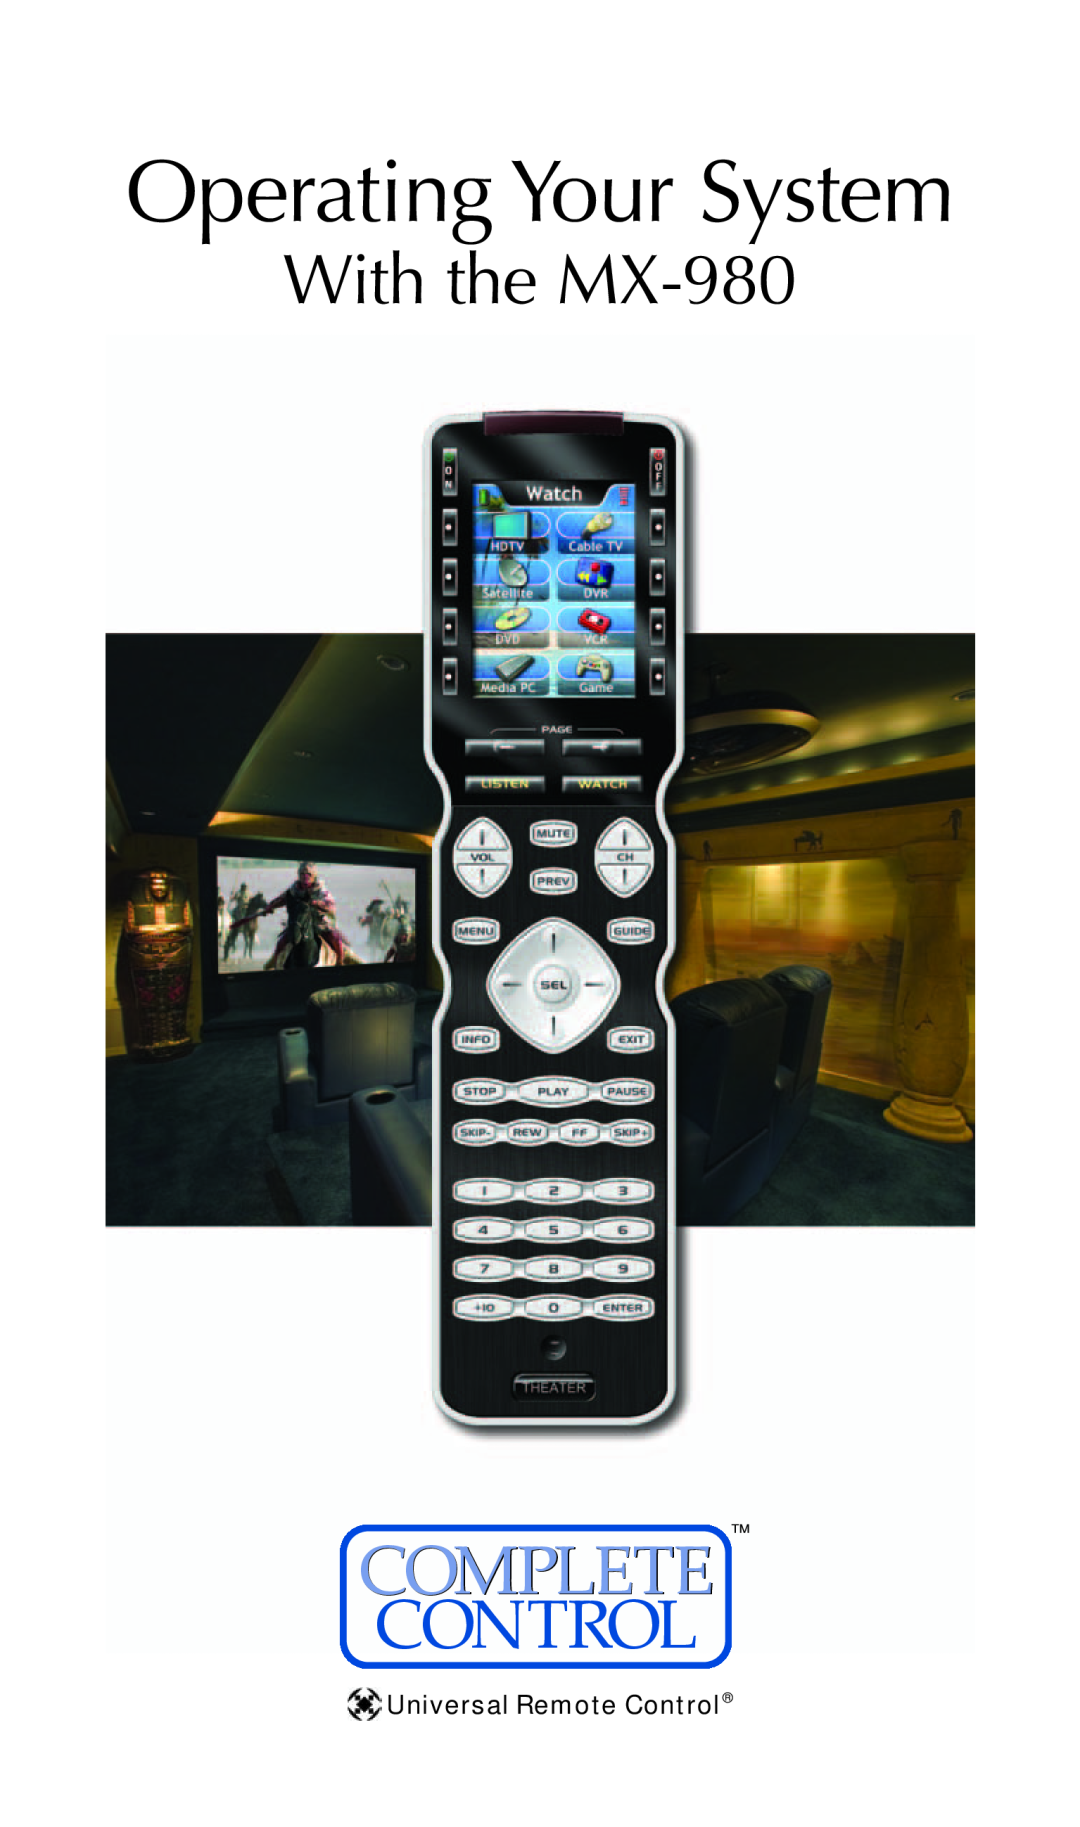 Universal Remote Control manual With the MX-980, Complete, Operating Your System, Universal Remote Control 